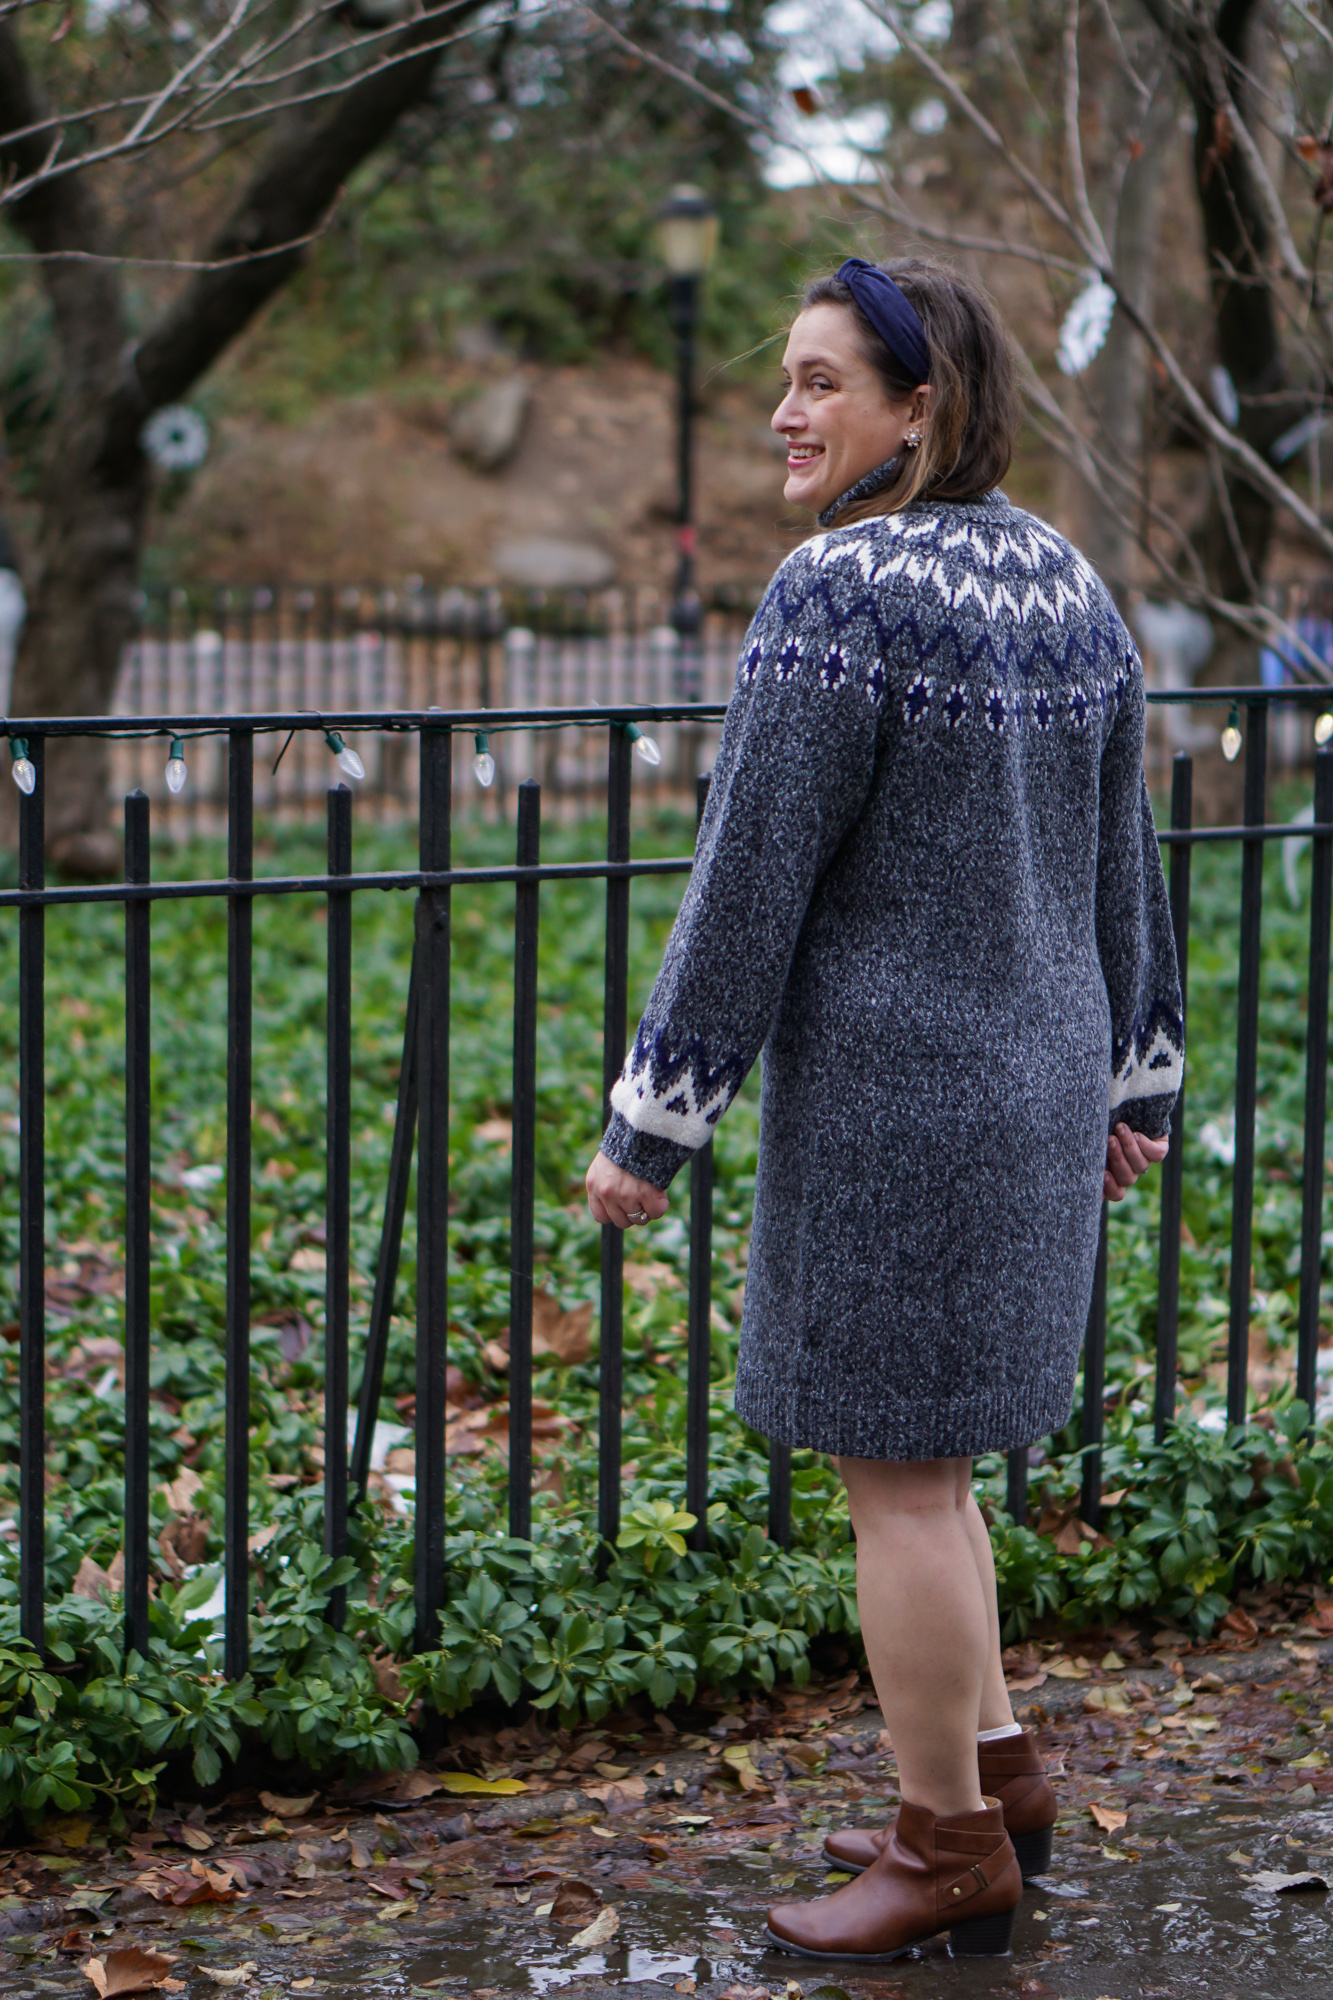 What to wear with a sweater dress